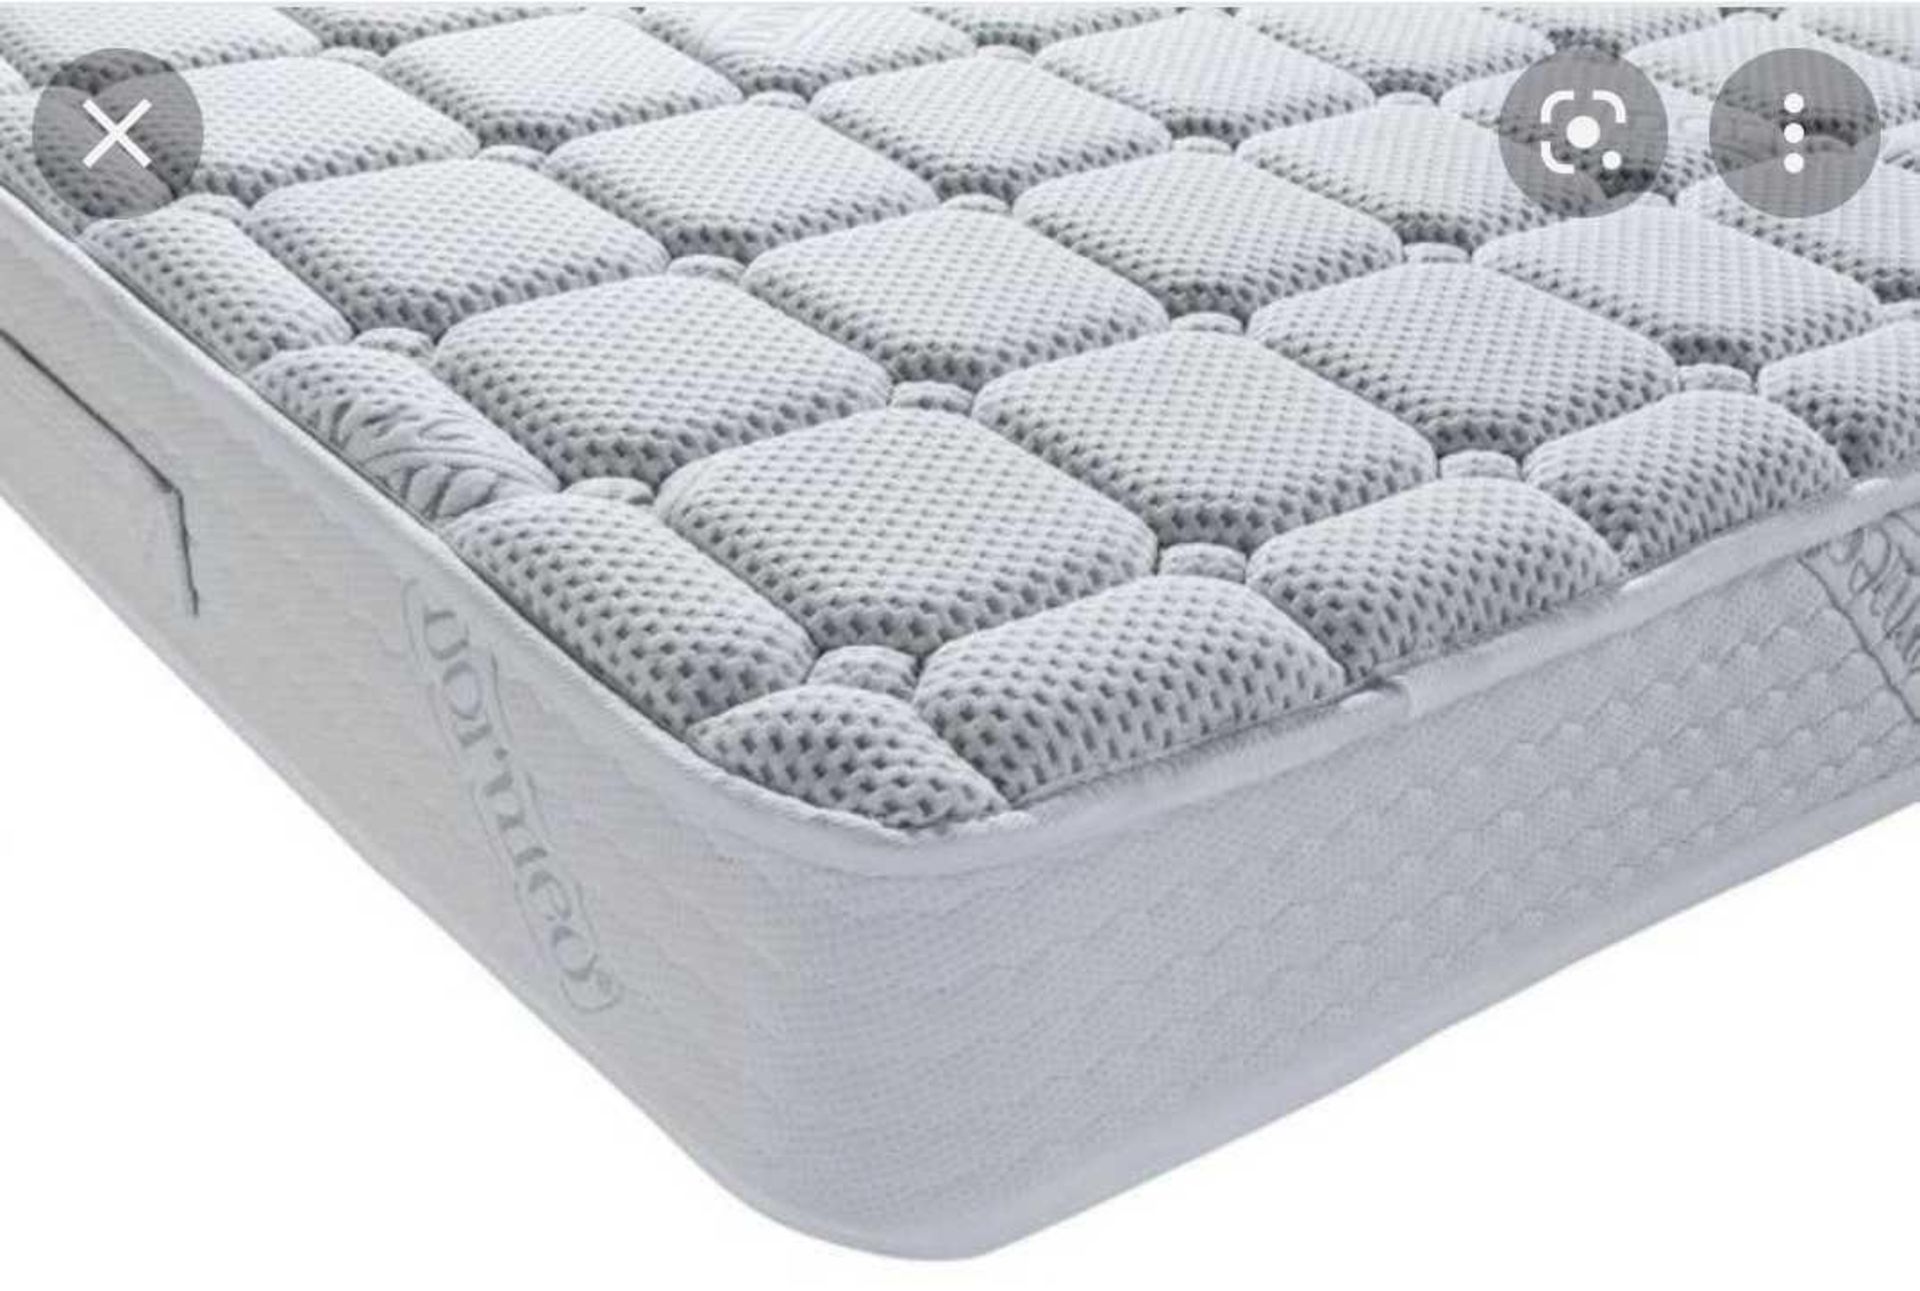 RRP £250 Boxed Dormeo Options Hybrid Double Mattress